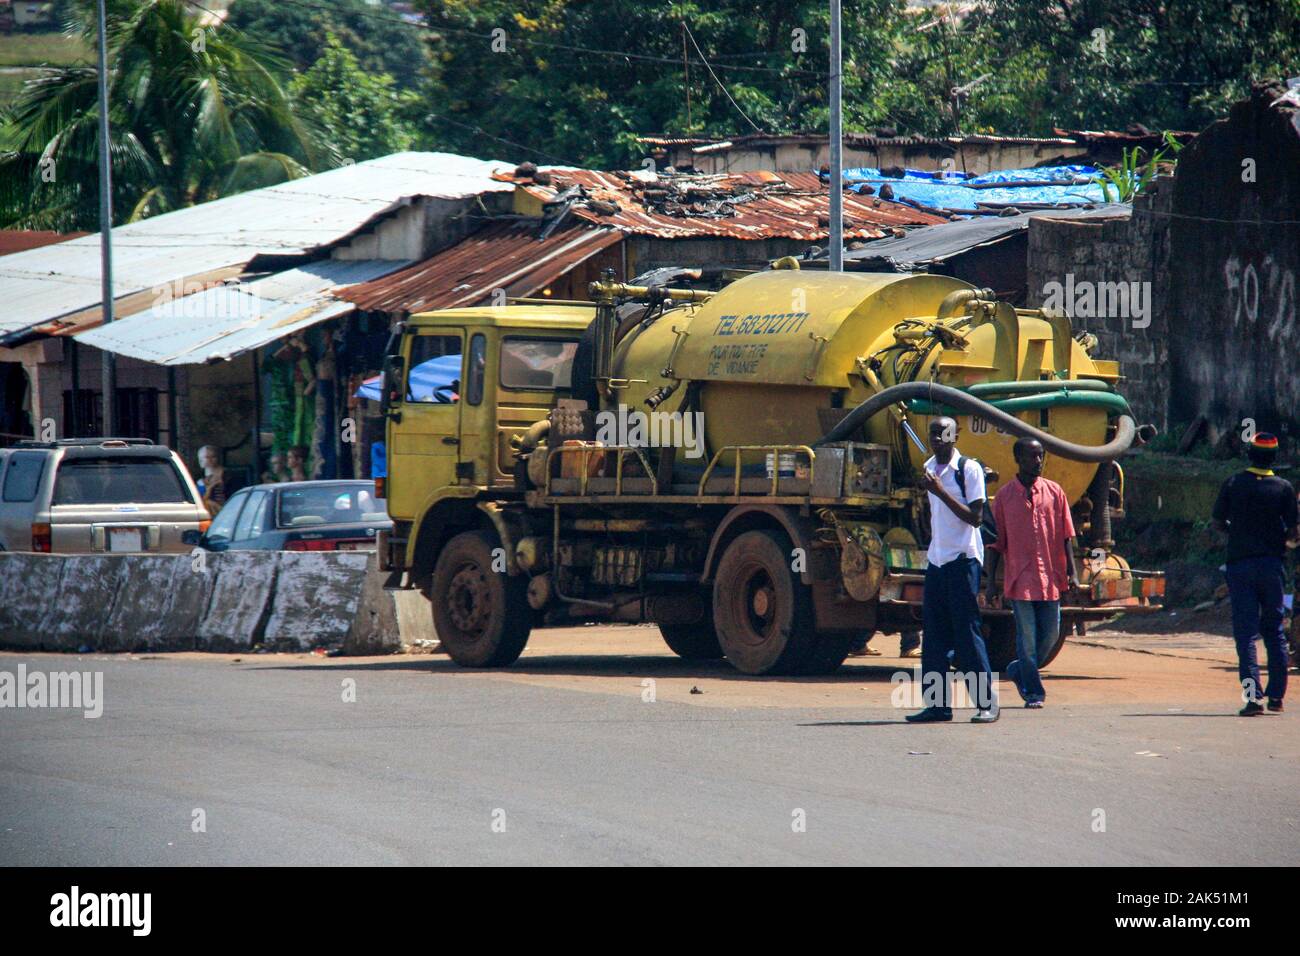 View of a yellow sewer truck parked at the side of a road in Conakry, Guinea, West Africa Stock Photo